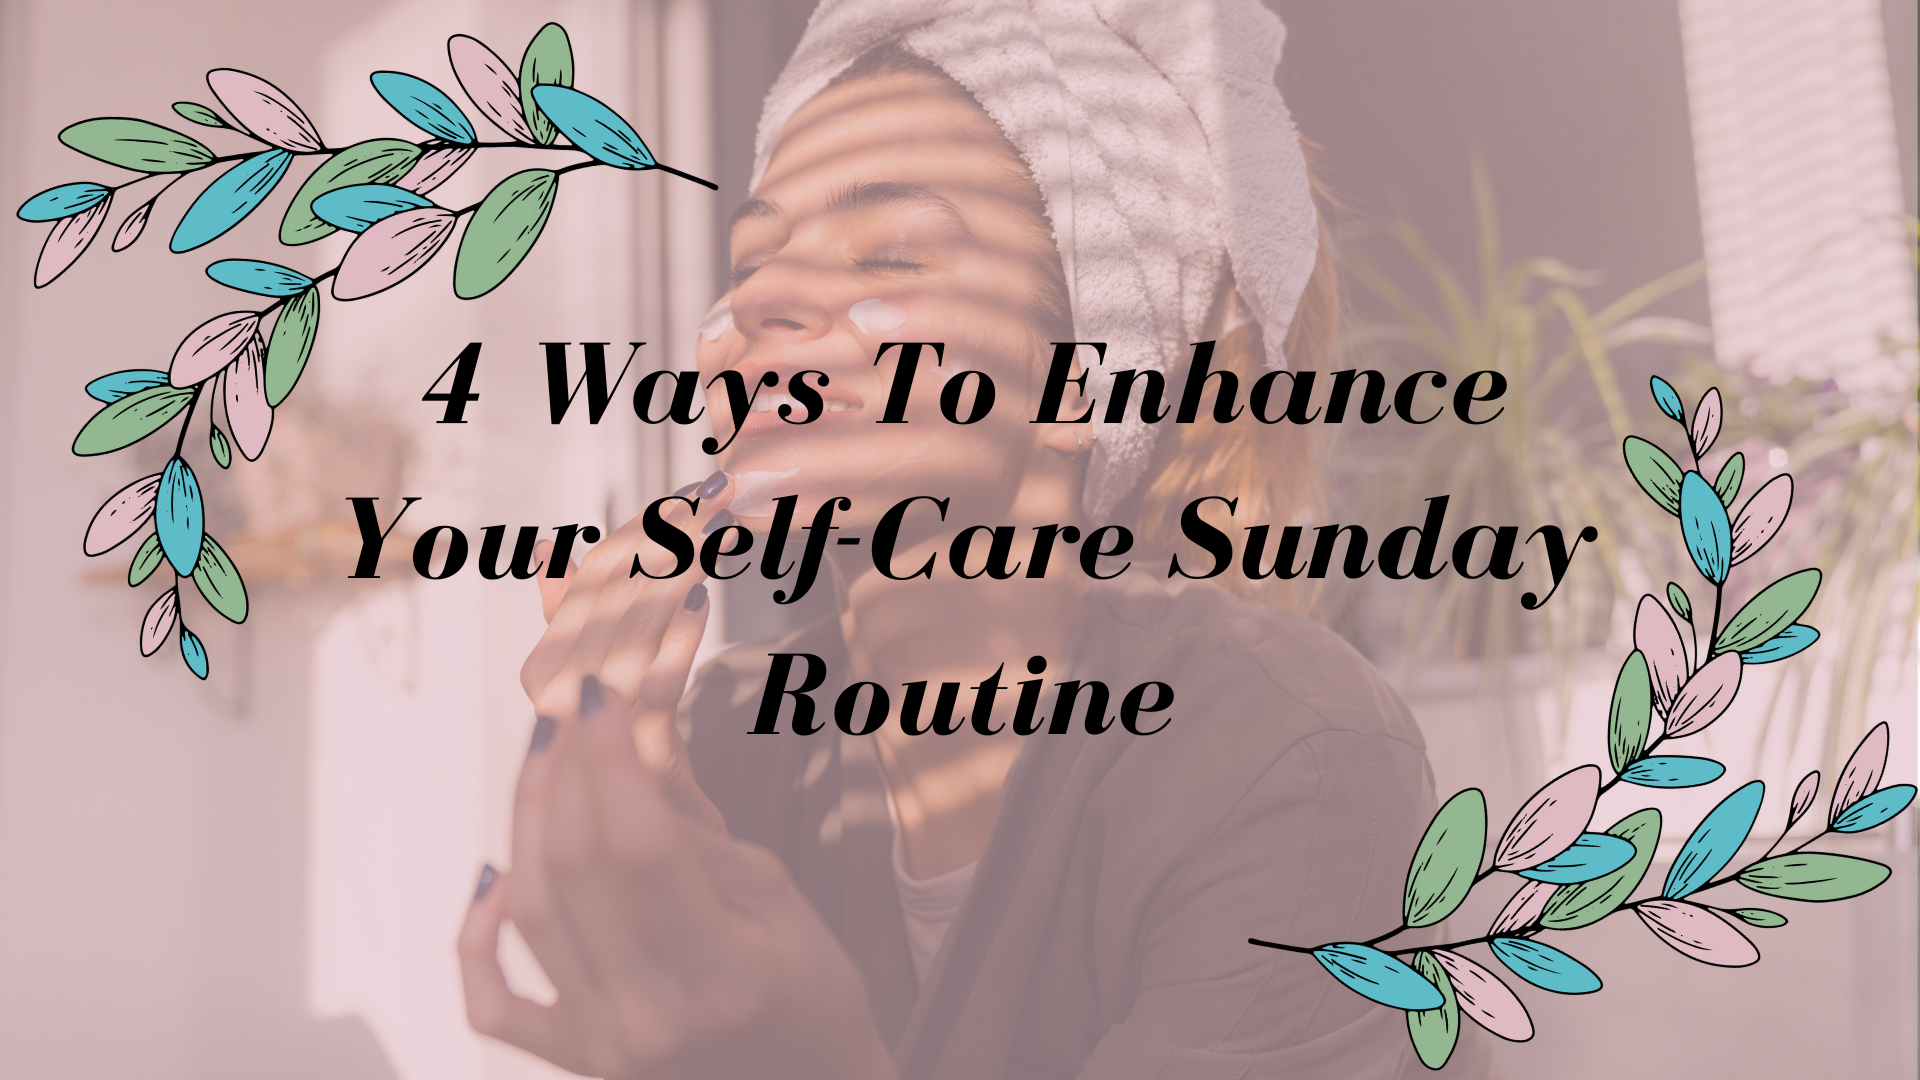 4 Ways To Enhance Your Self-Care Sunday Routine